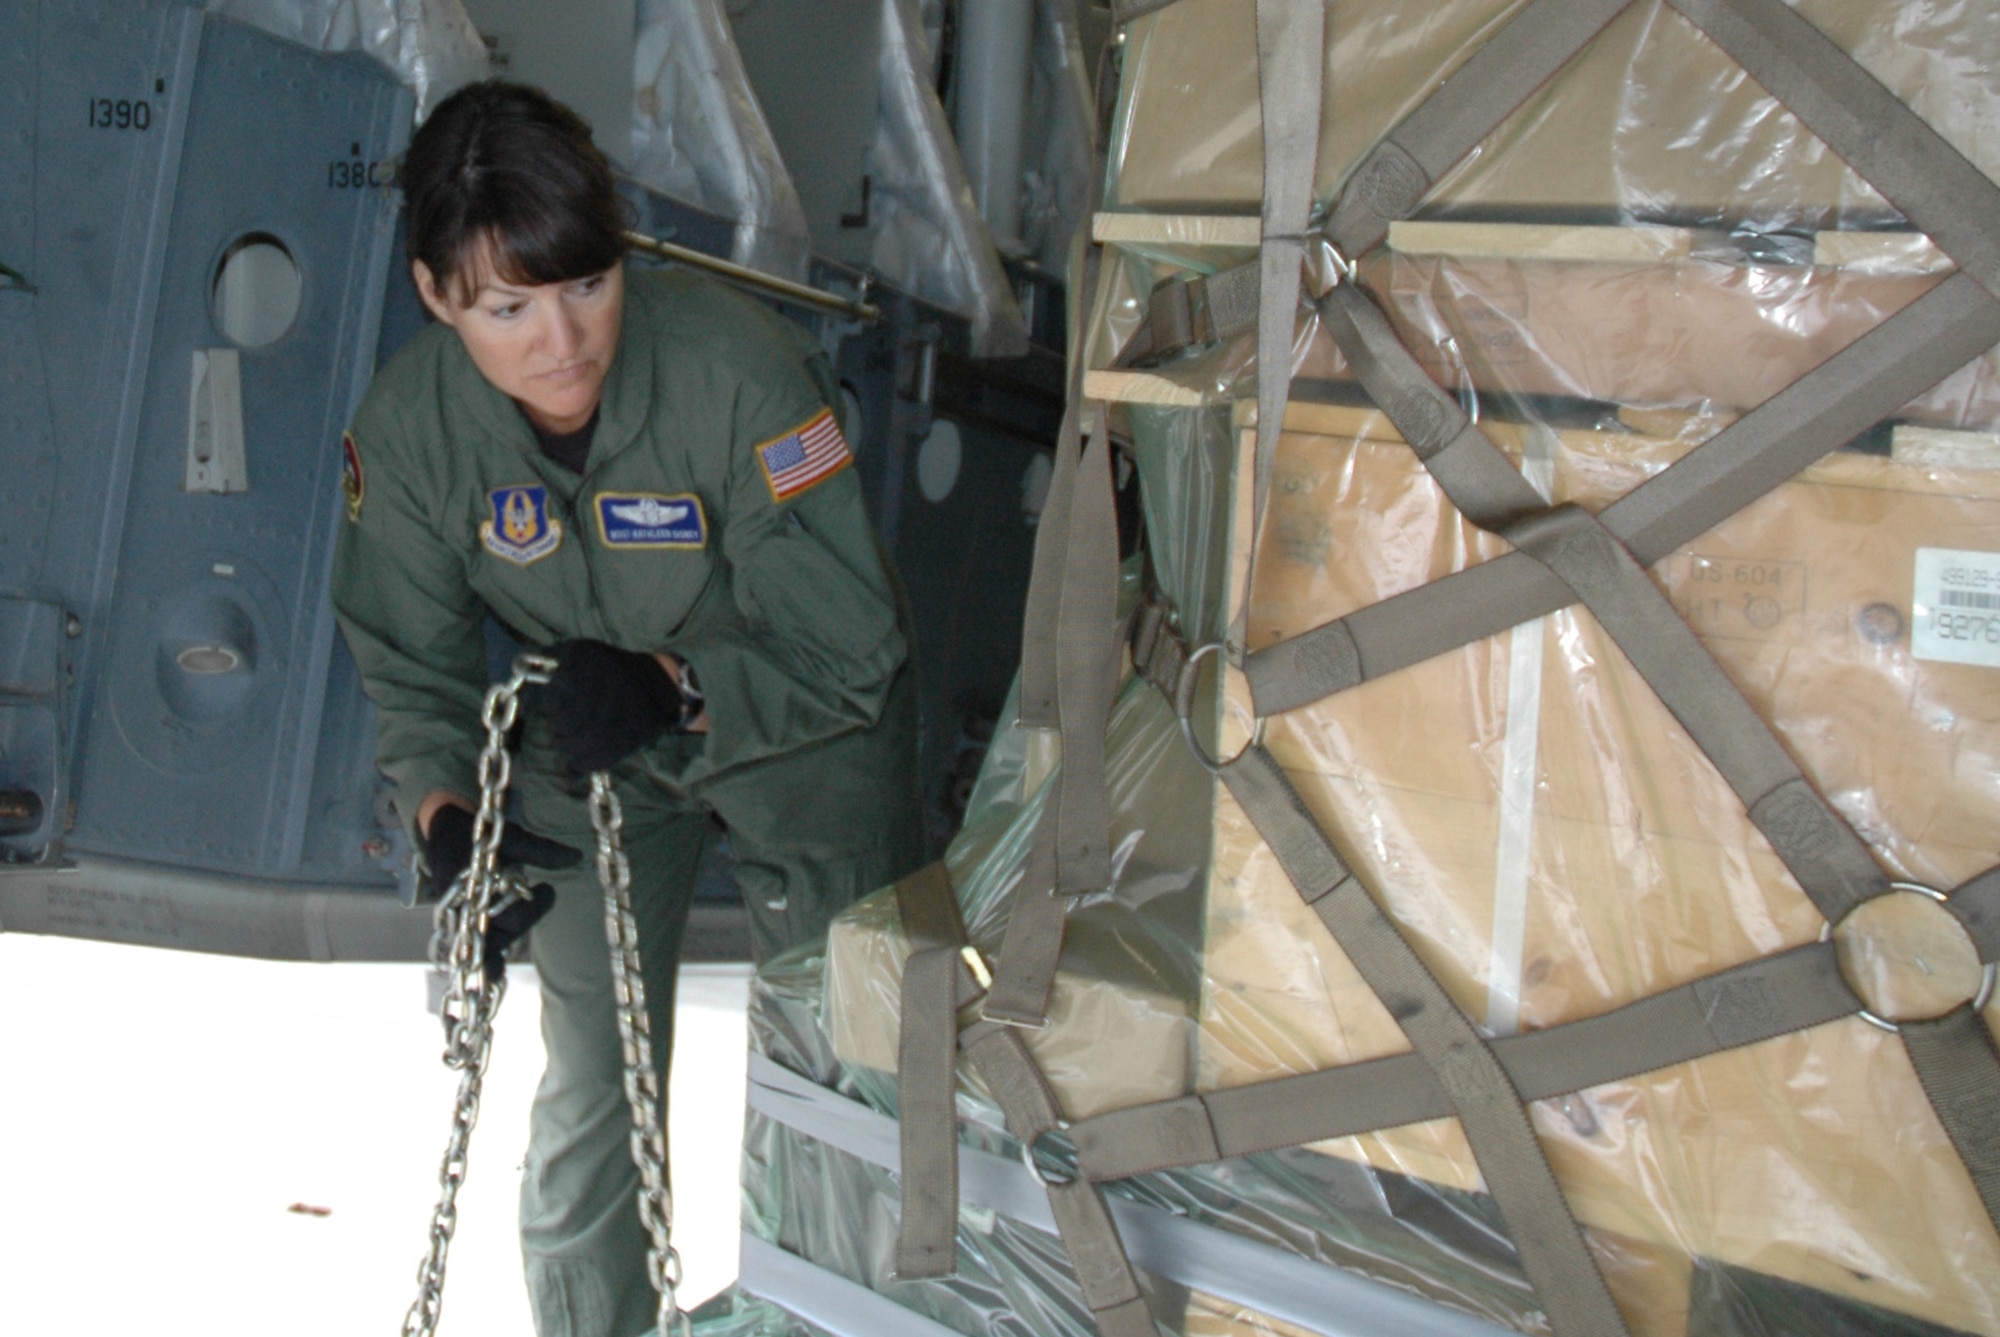 MCCHORD AIR FORCE BASE, Wash.- Master Sgt. Kathleen Disney, a loadmaster with the 313th Airlift Squadron here, chains up a pallet of goods to be transported to Antarctica as part of Operation Deep Freeze. Sergeant Disney was an instructor at the C17A Loadmaster Initial Qualification Course, Altus Air Force Base, Okla., last year and will teach there again when she returns from Deep Freeze. (U.S. Air Force photo/Tech. Sgt. Jake Chappelle)